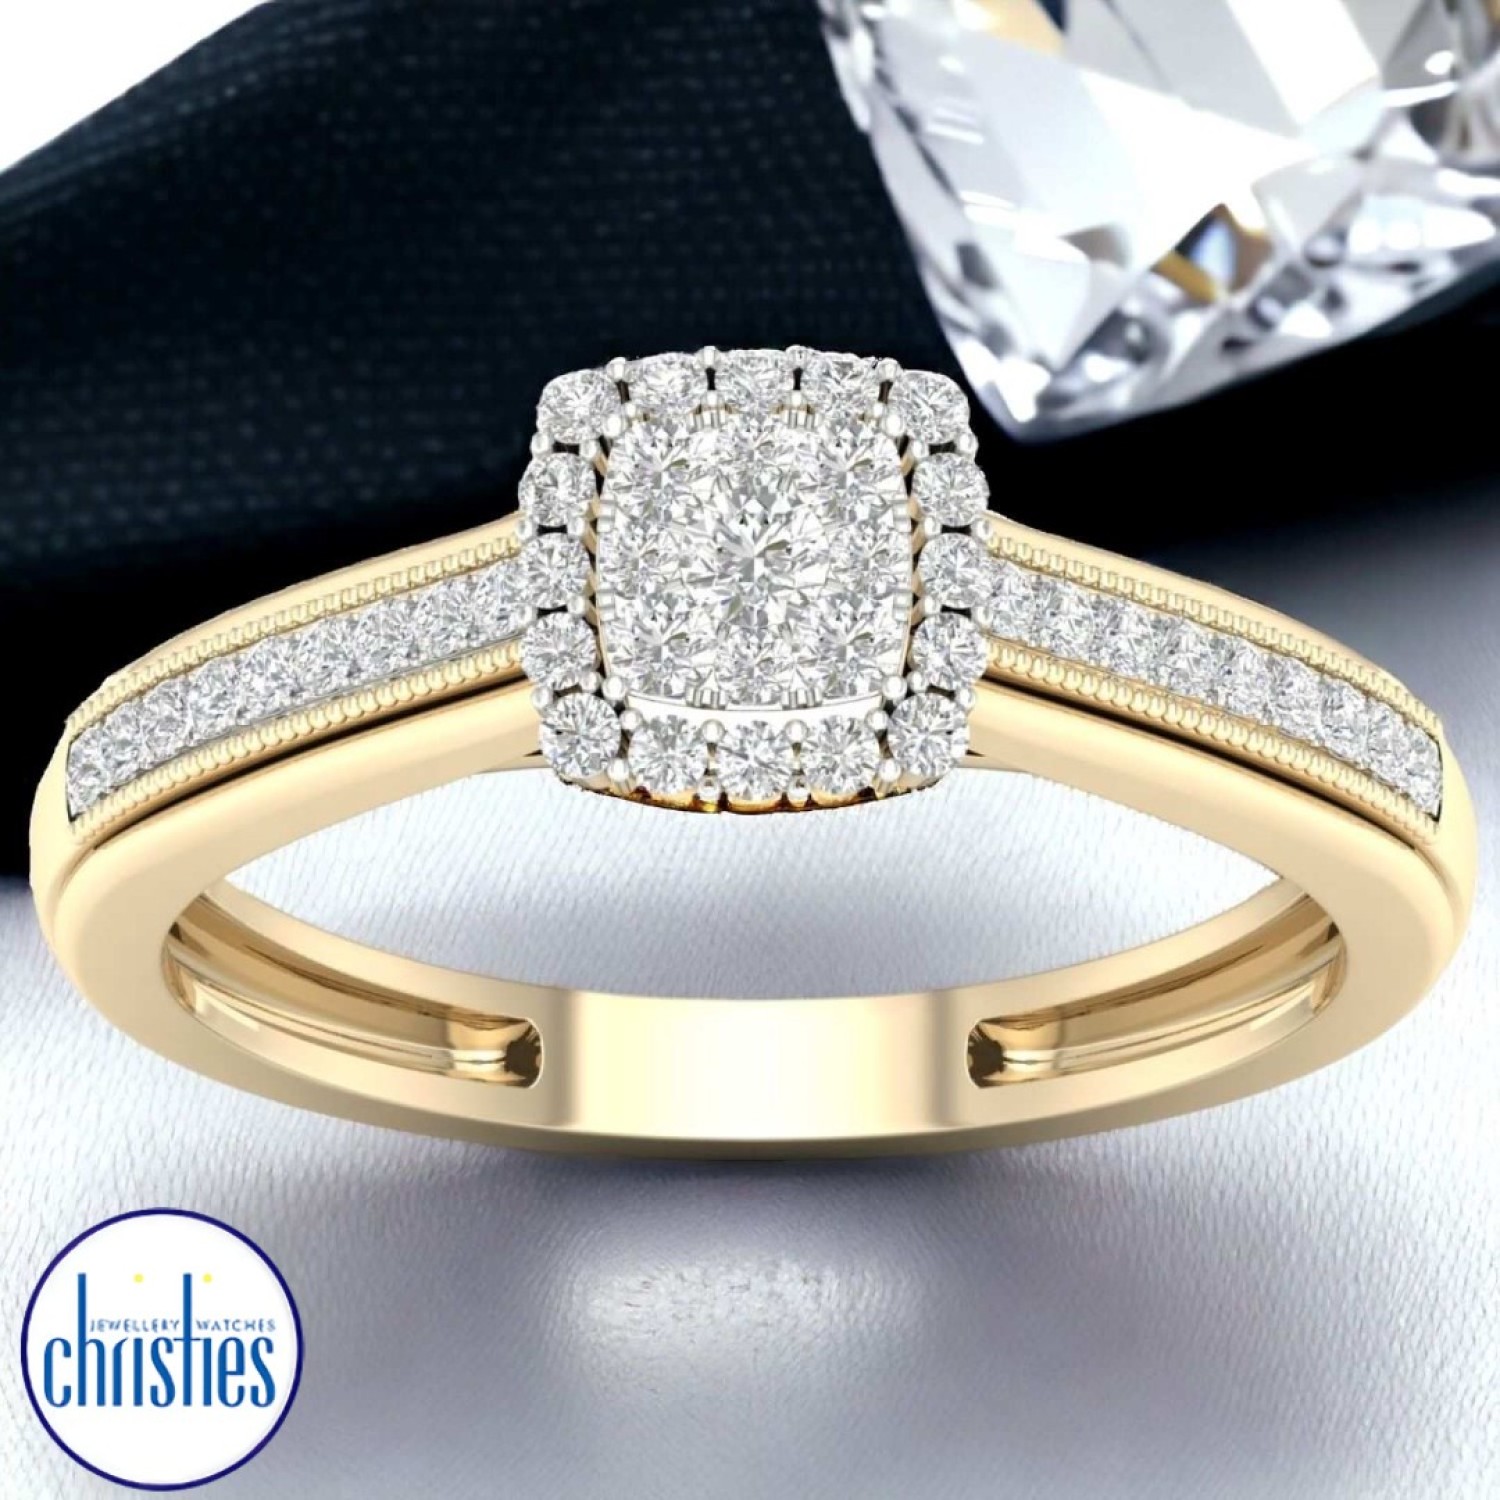 Promise Ring with 0.25 Carat of Diamonds in 9ct Yellow Gold  RB11423EG RB11423EG/9KY